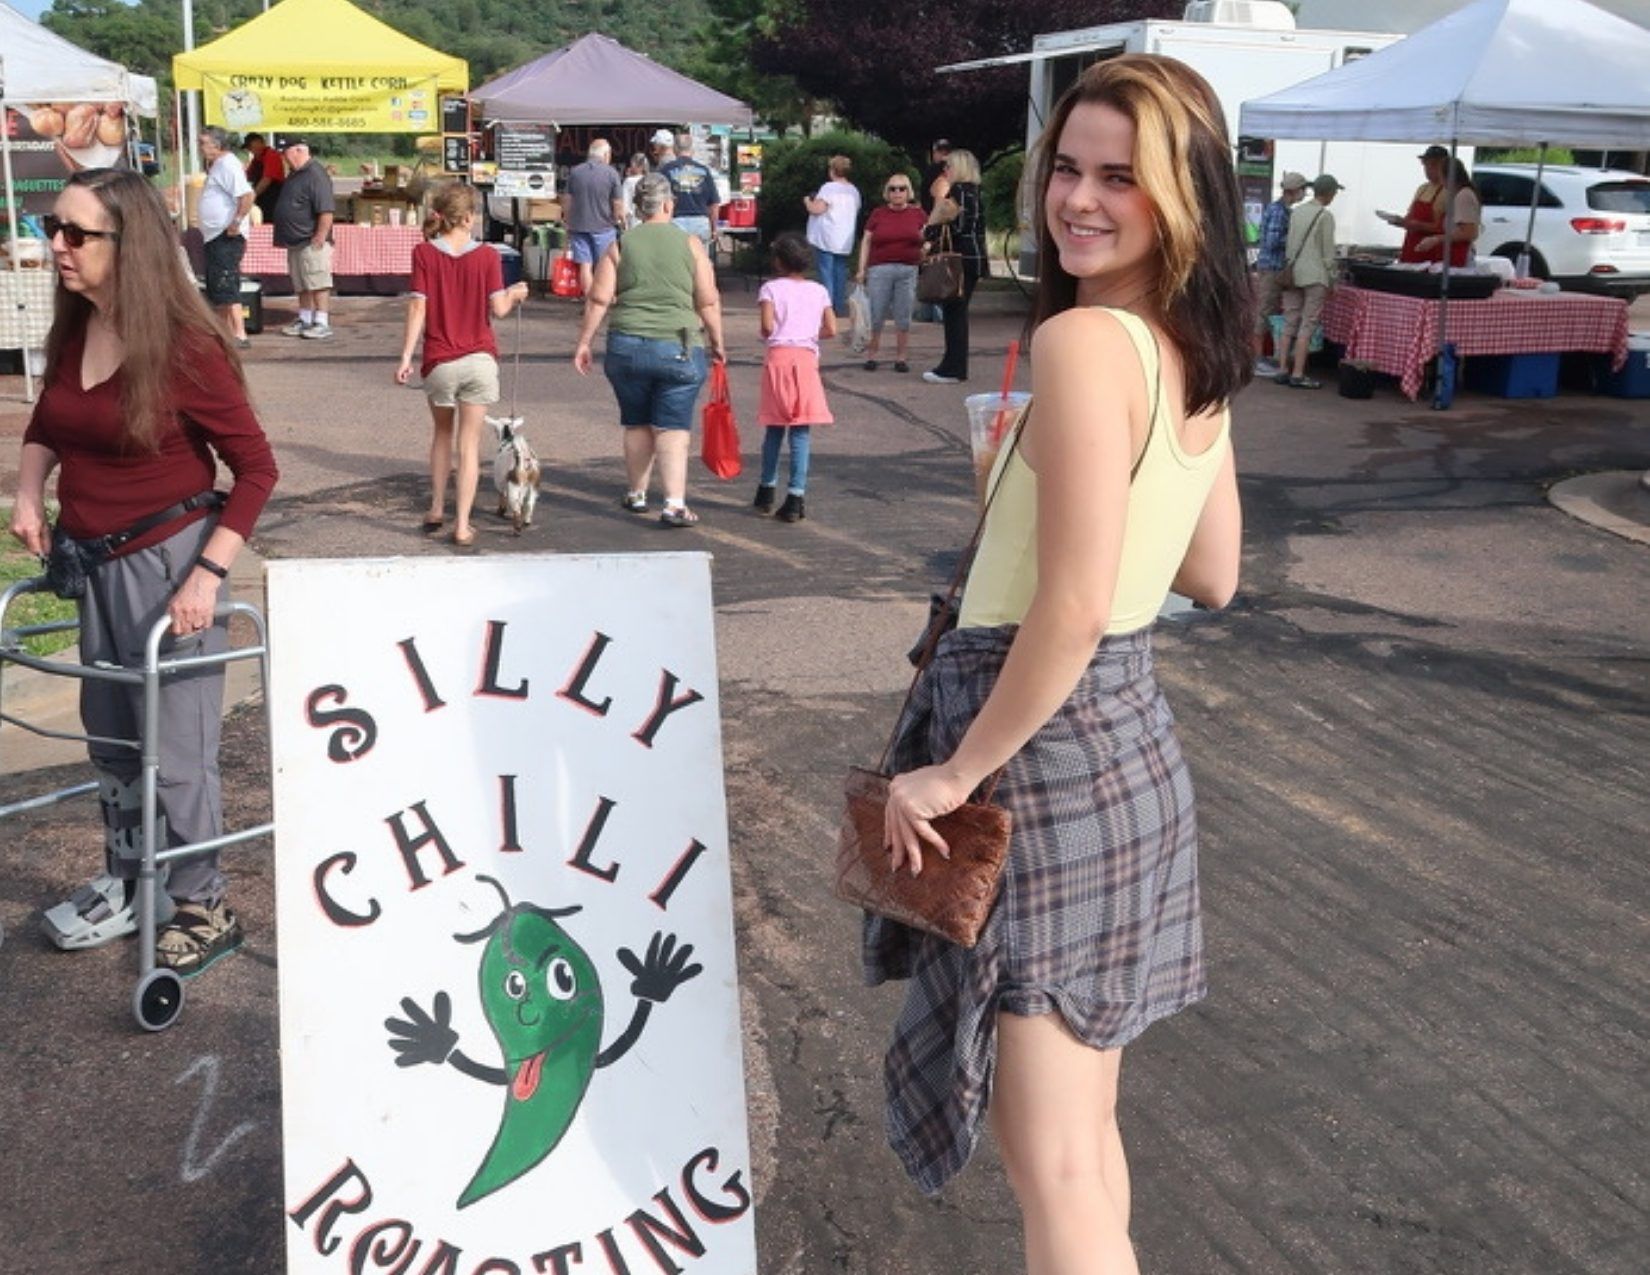 Girl standing in front of Silly Chili Roasting sign Payson Farmers Market, Arizona